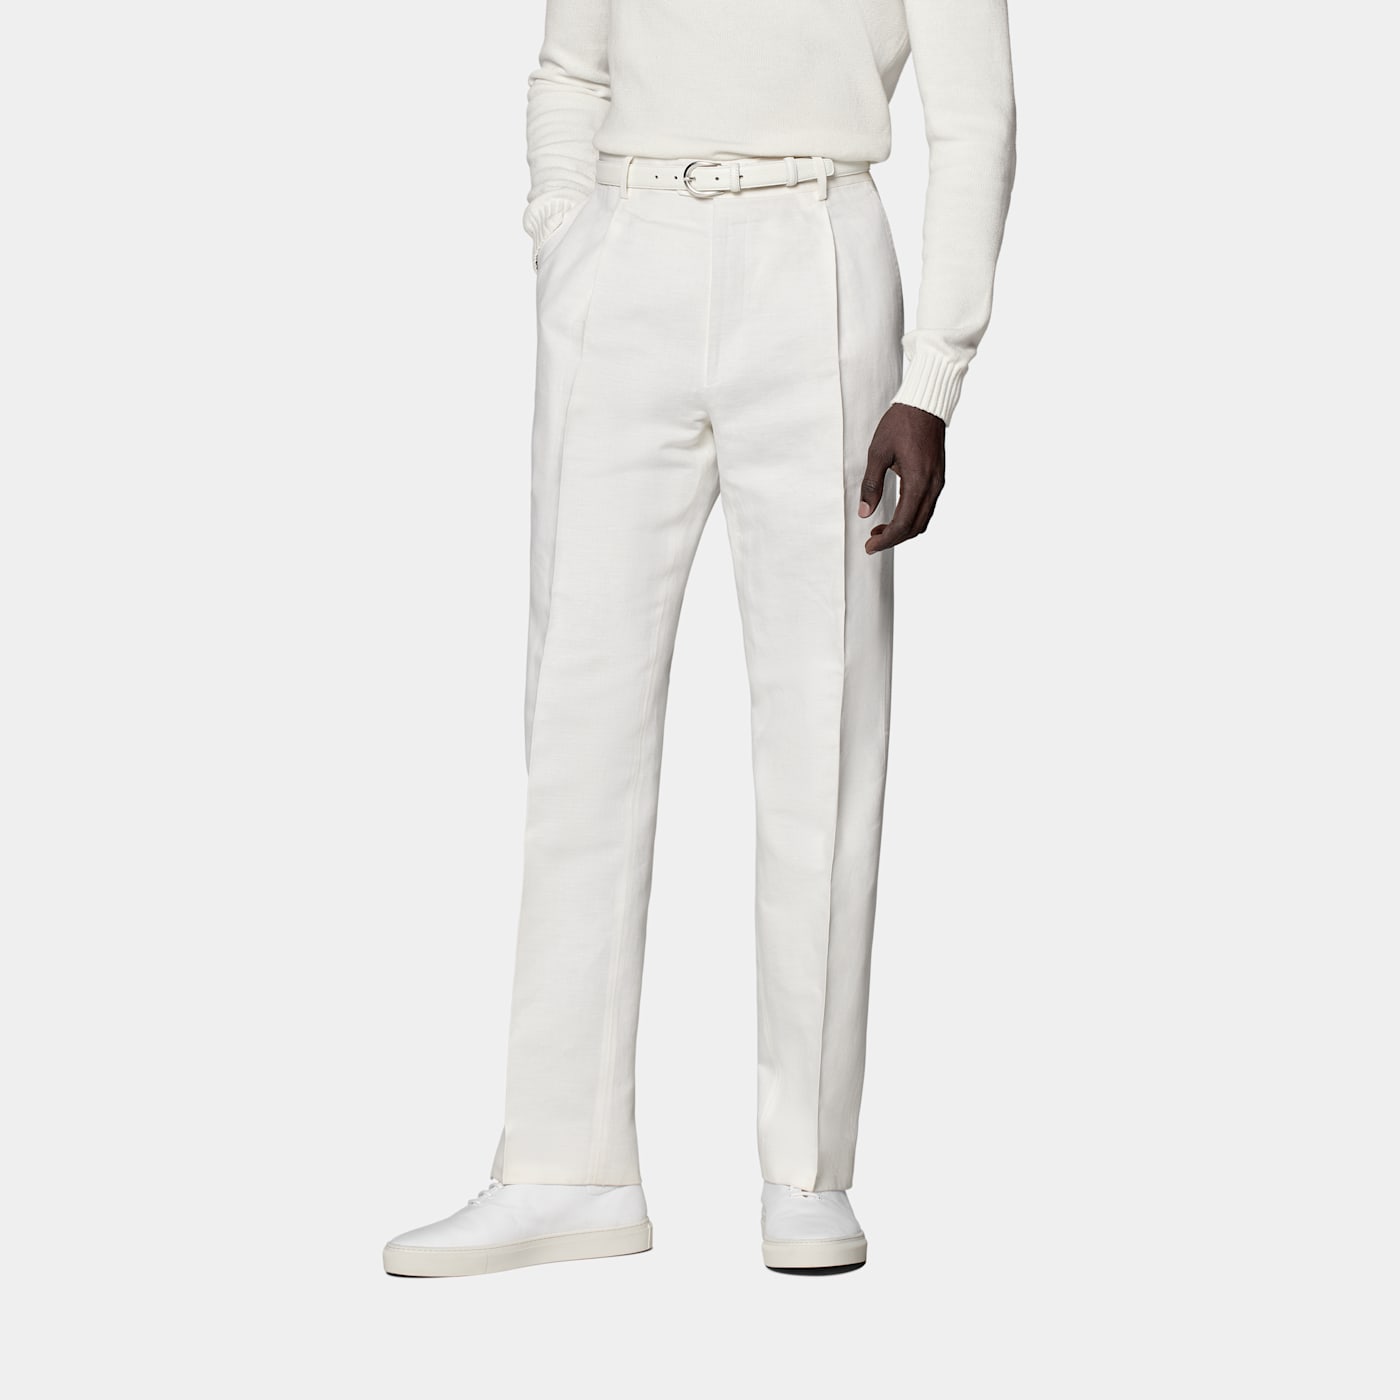 Shop Suitsupply White Wide Leg Straight Duca Pants